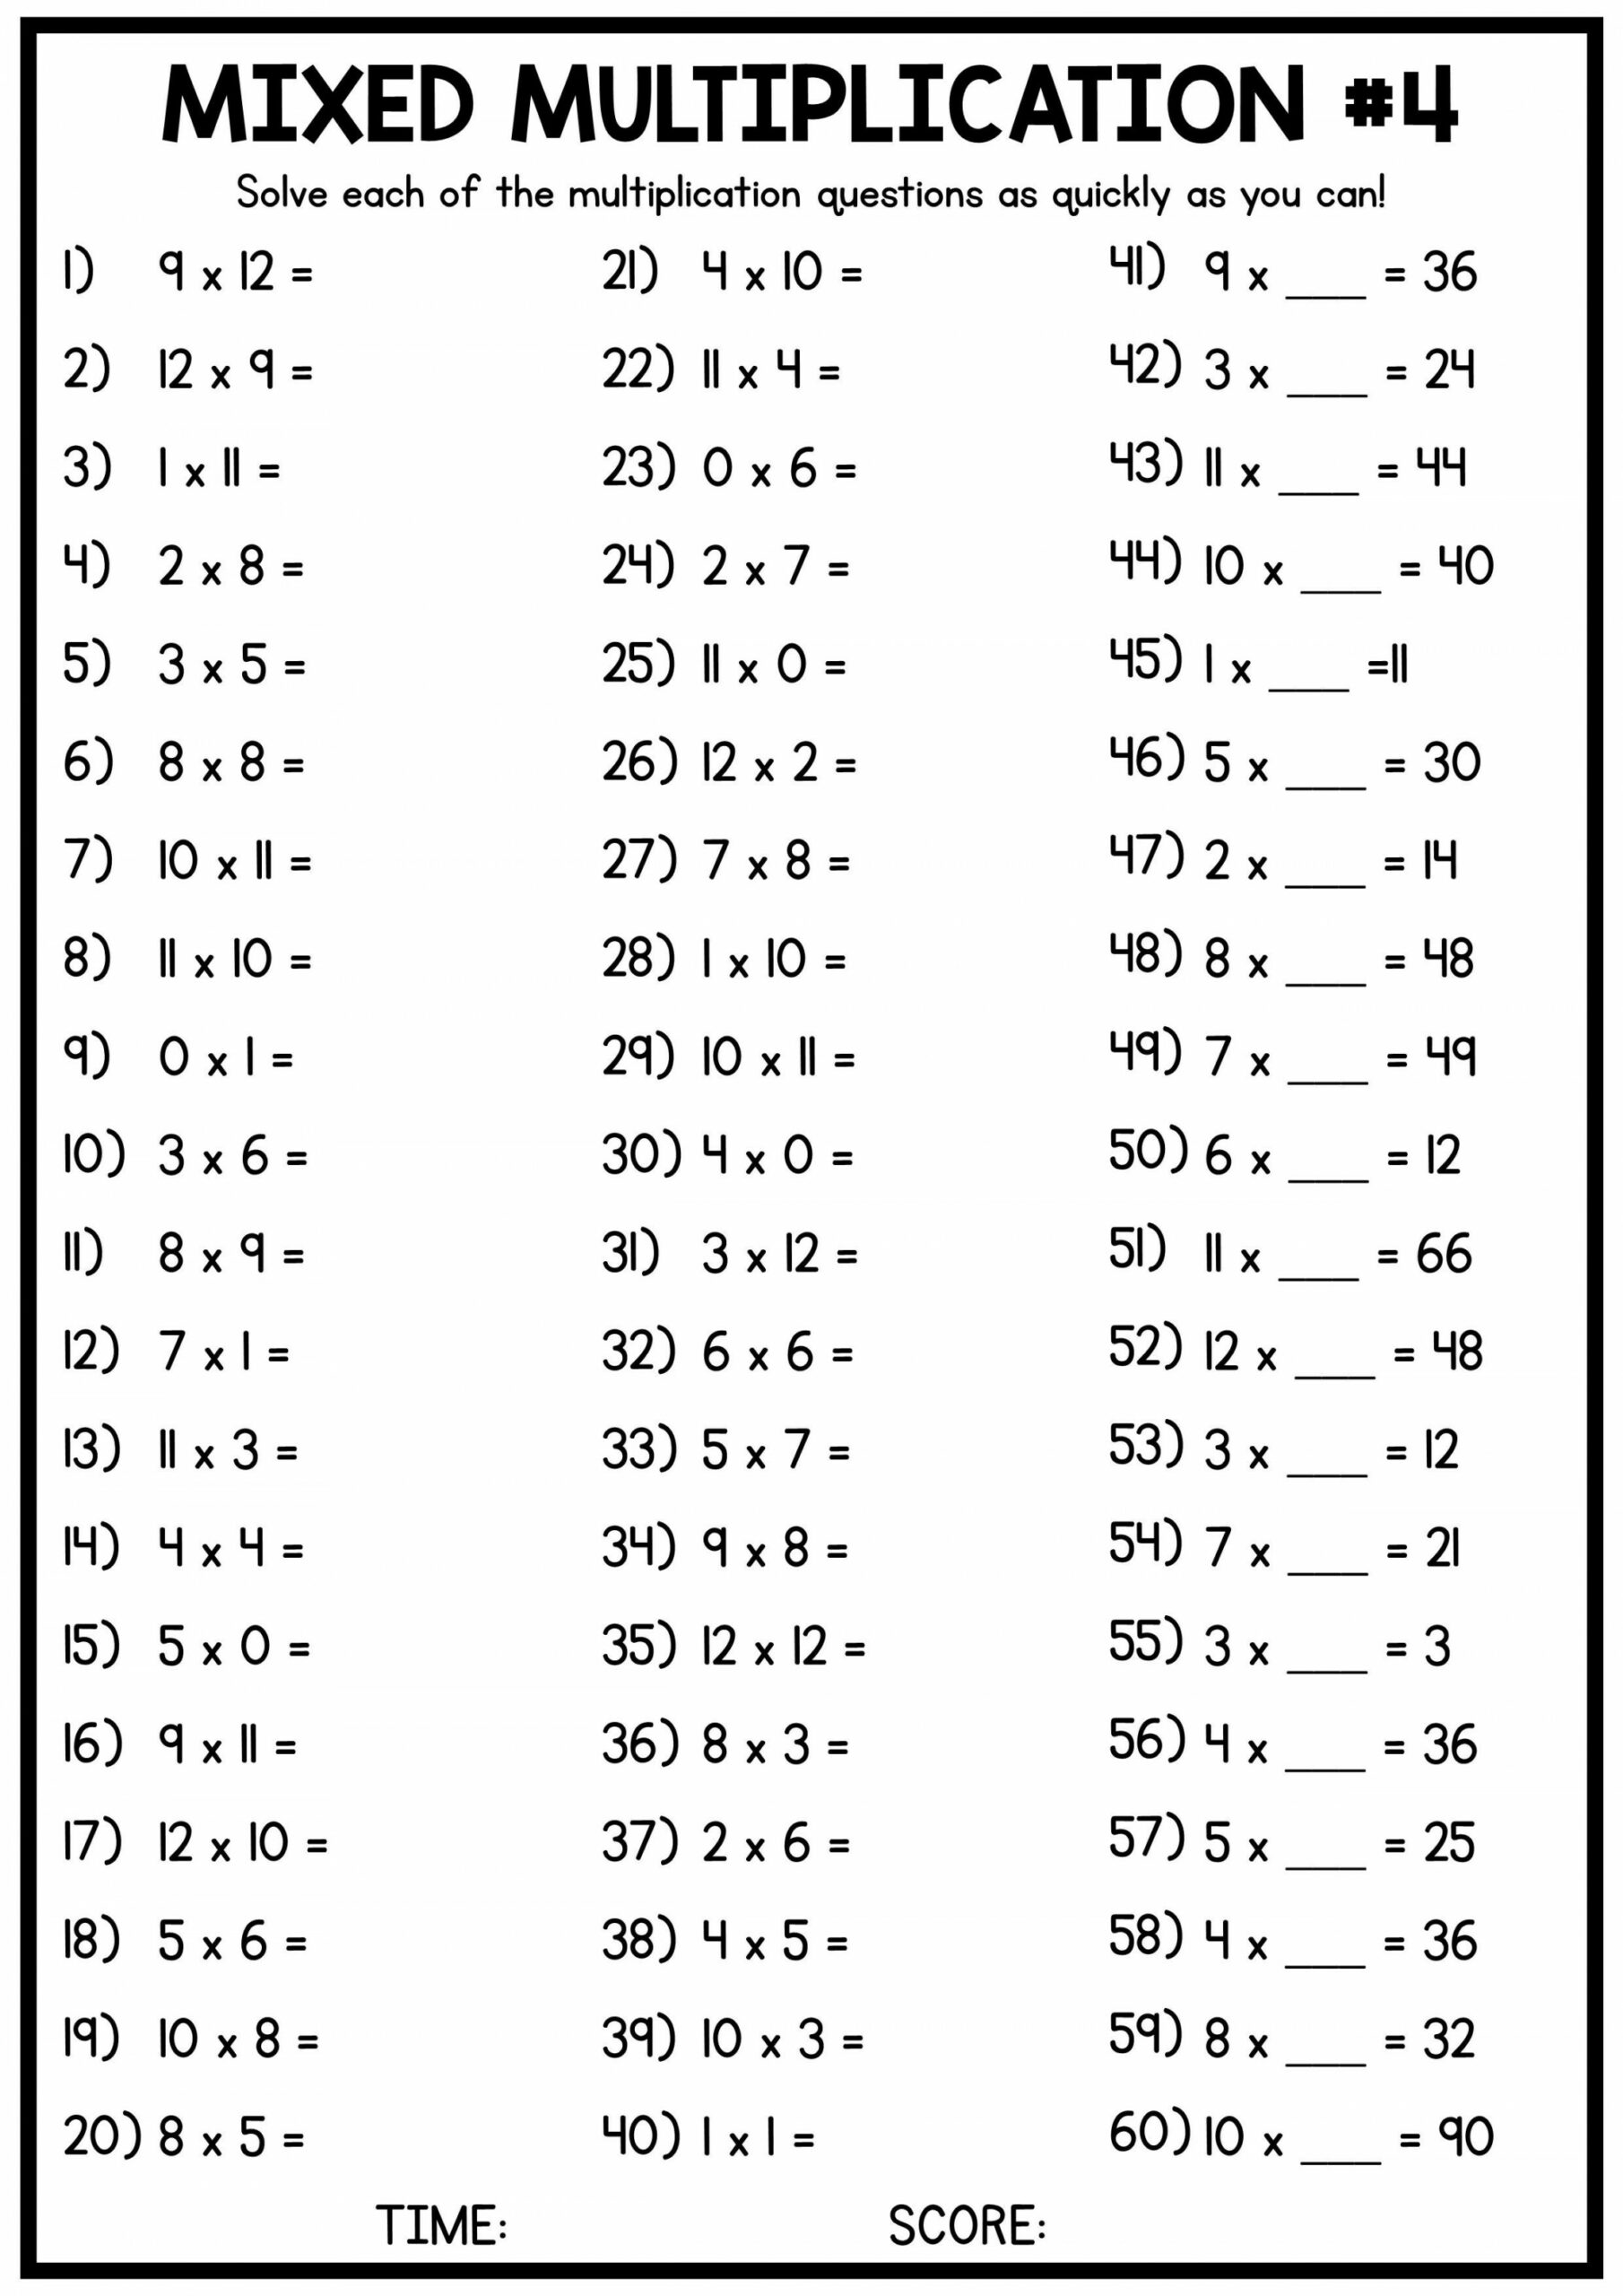 Mixed Multiplication Times Table Worksheets - Four Free Worksheets